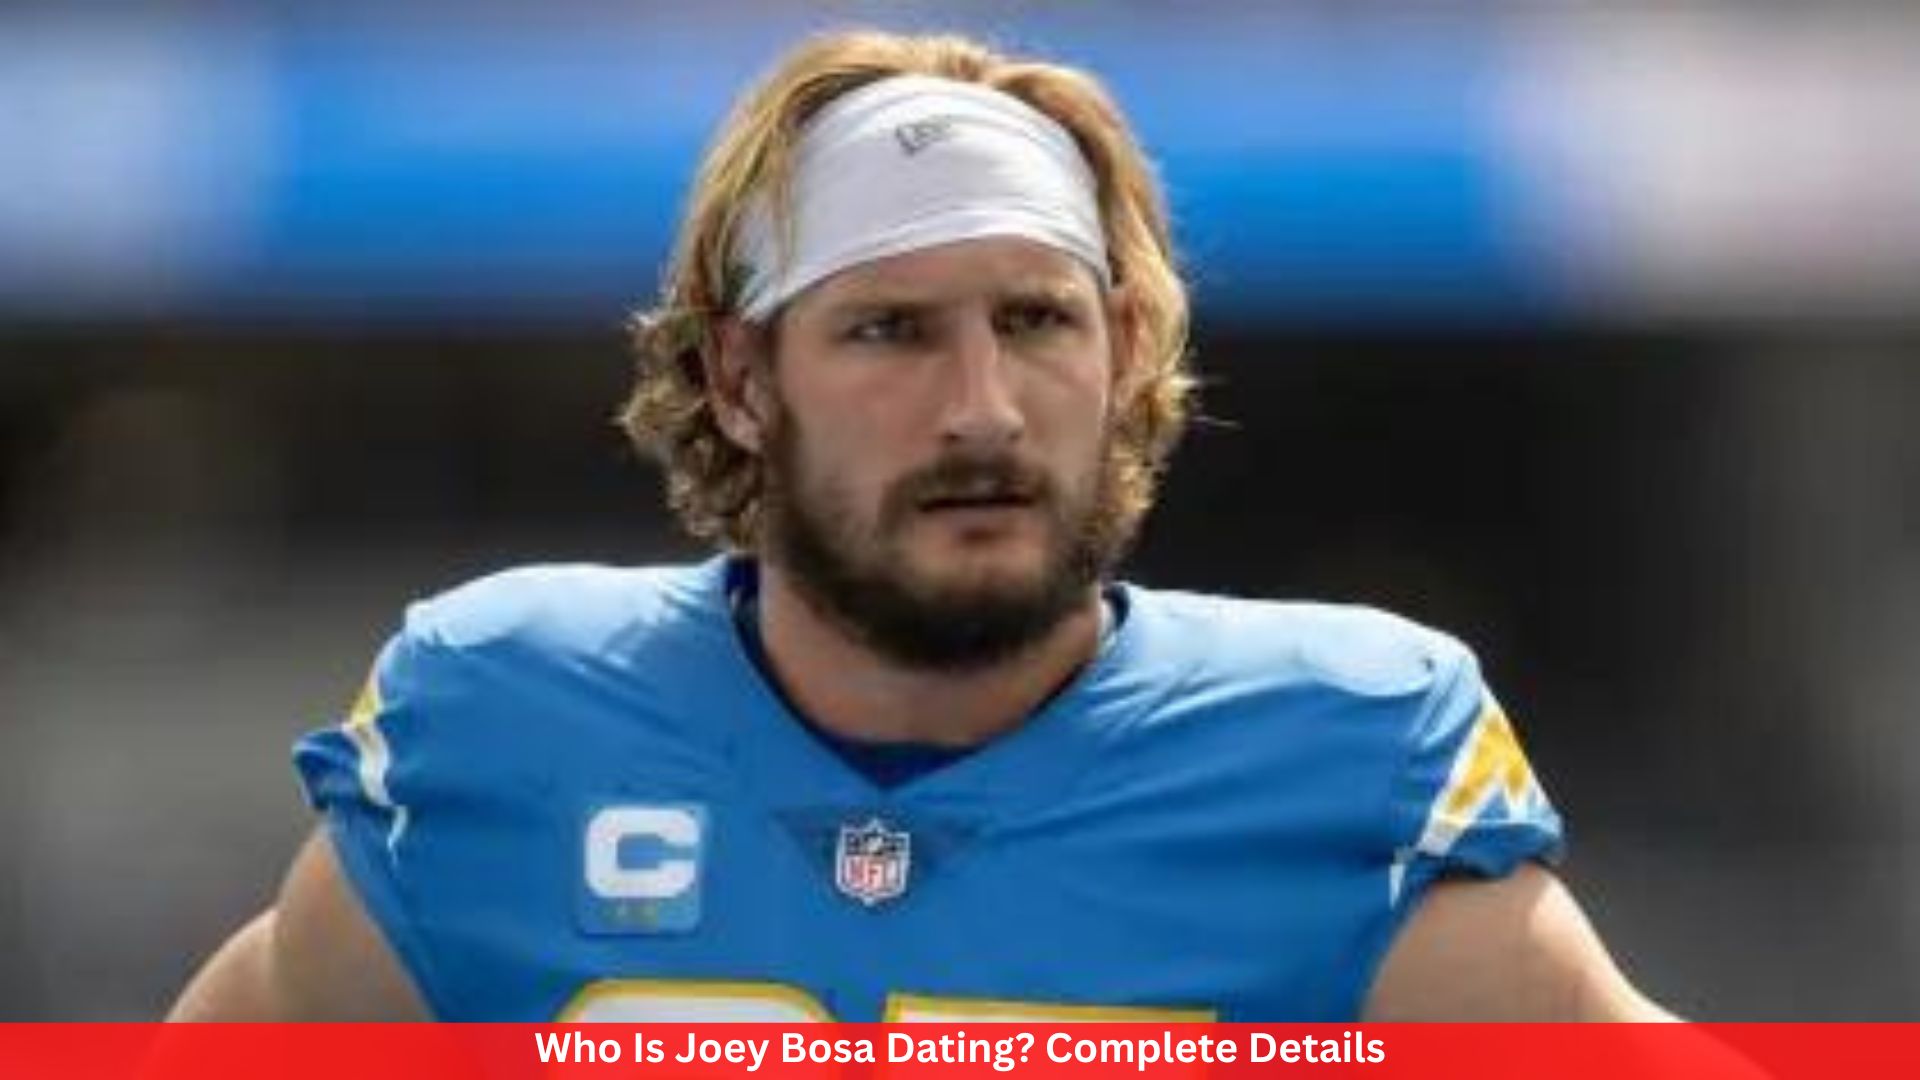 Who Is Joey Bosa Dating? Complete Details